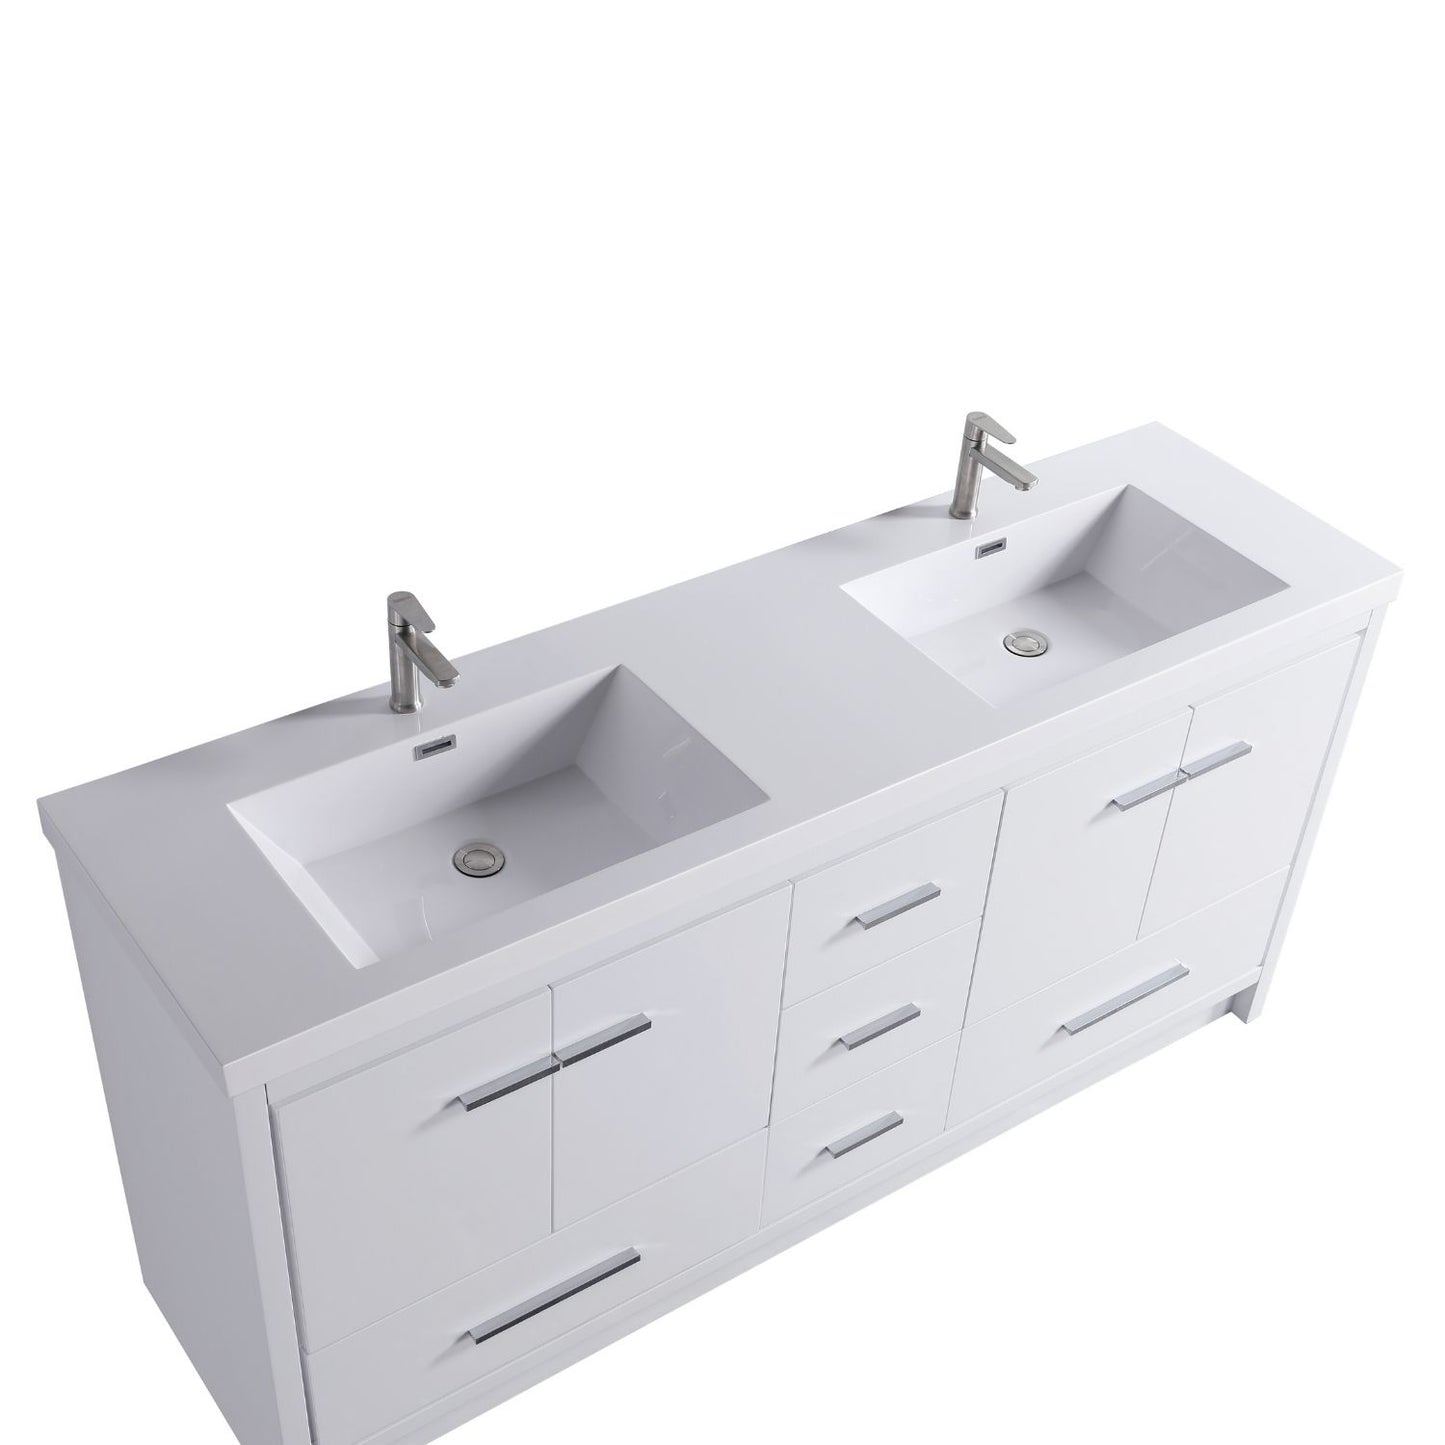 Waterpar® 70.87 in. L x 19.7 in. W x 35 in. H Bathroom Cabinet with Dual Resin Sink